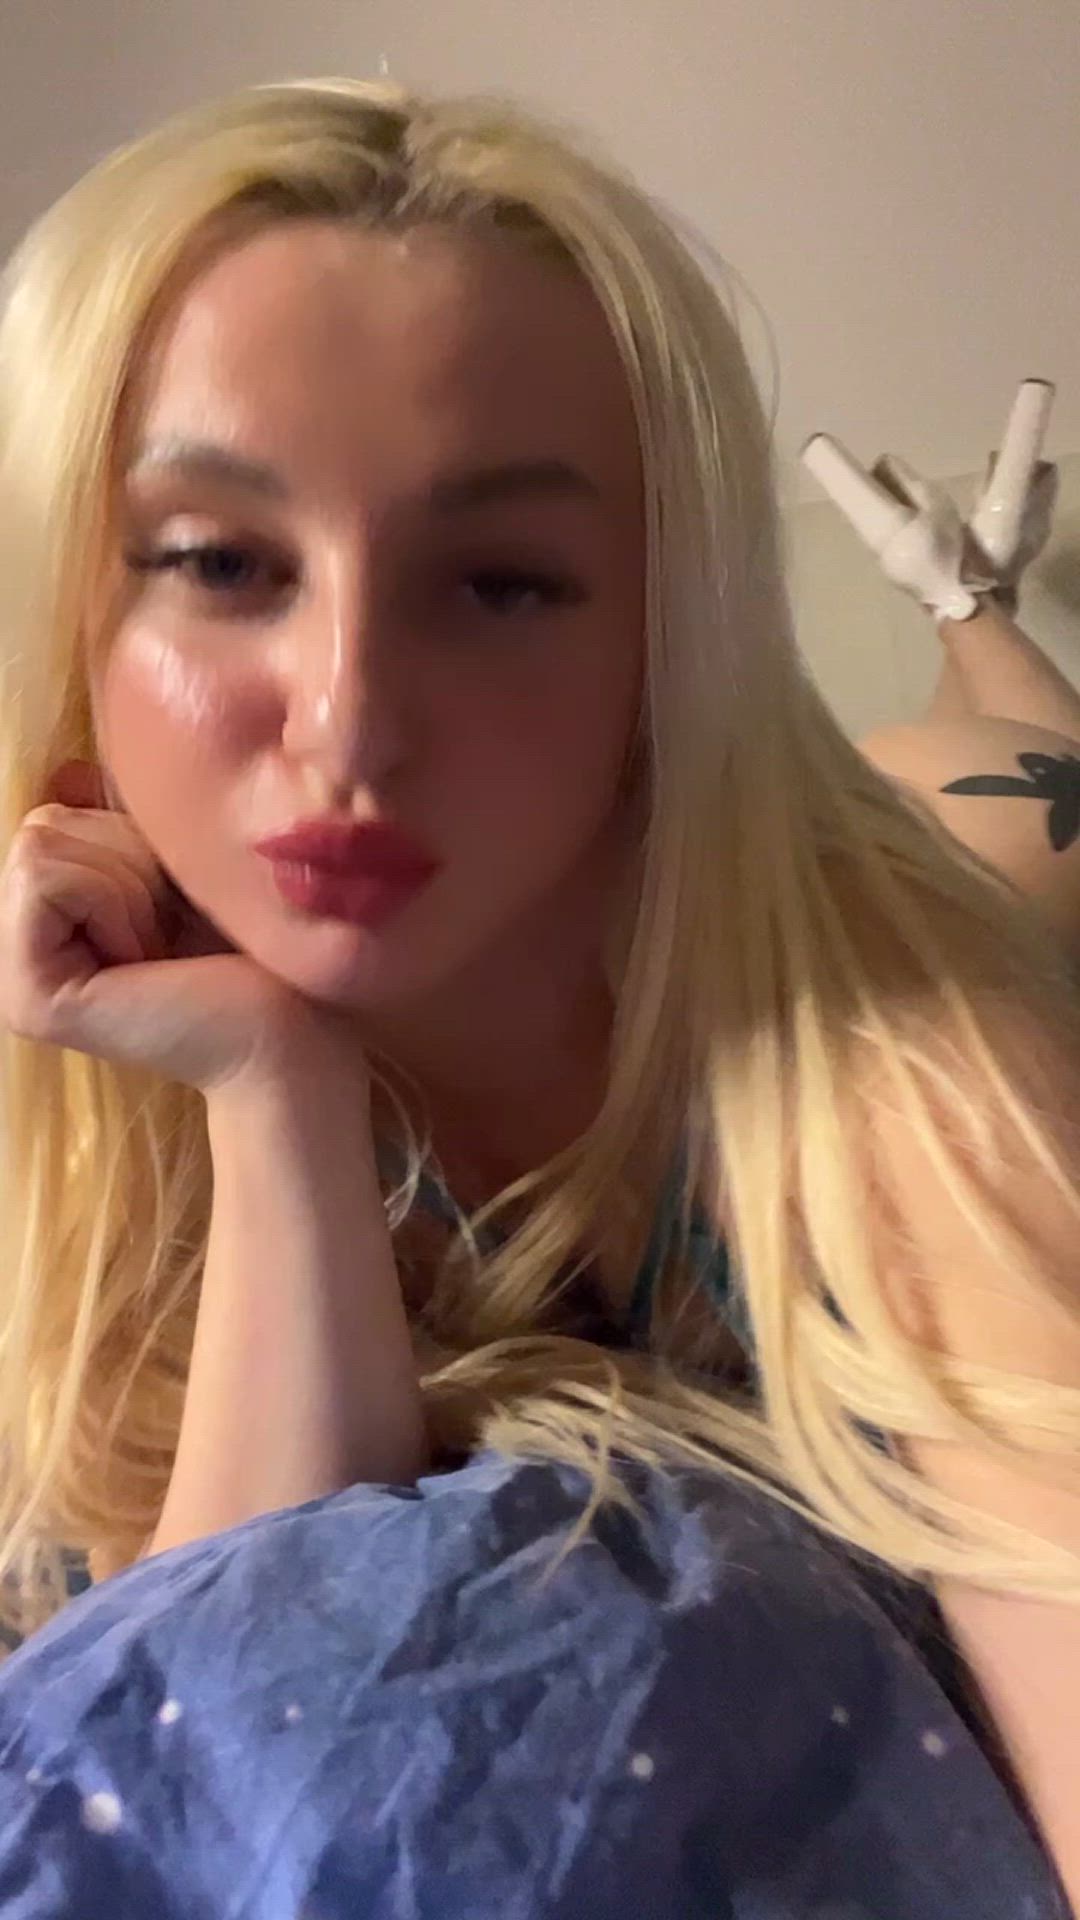 Teen porn video with onlyfans model juliaxsecrets <strong>@juliaxsecrets</strong>